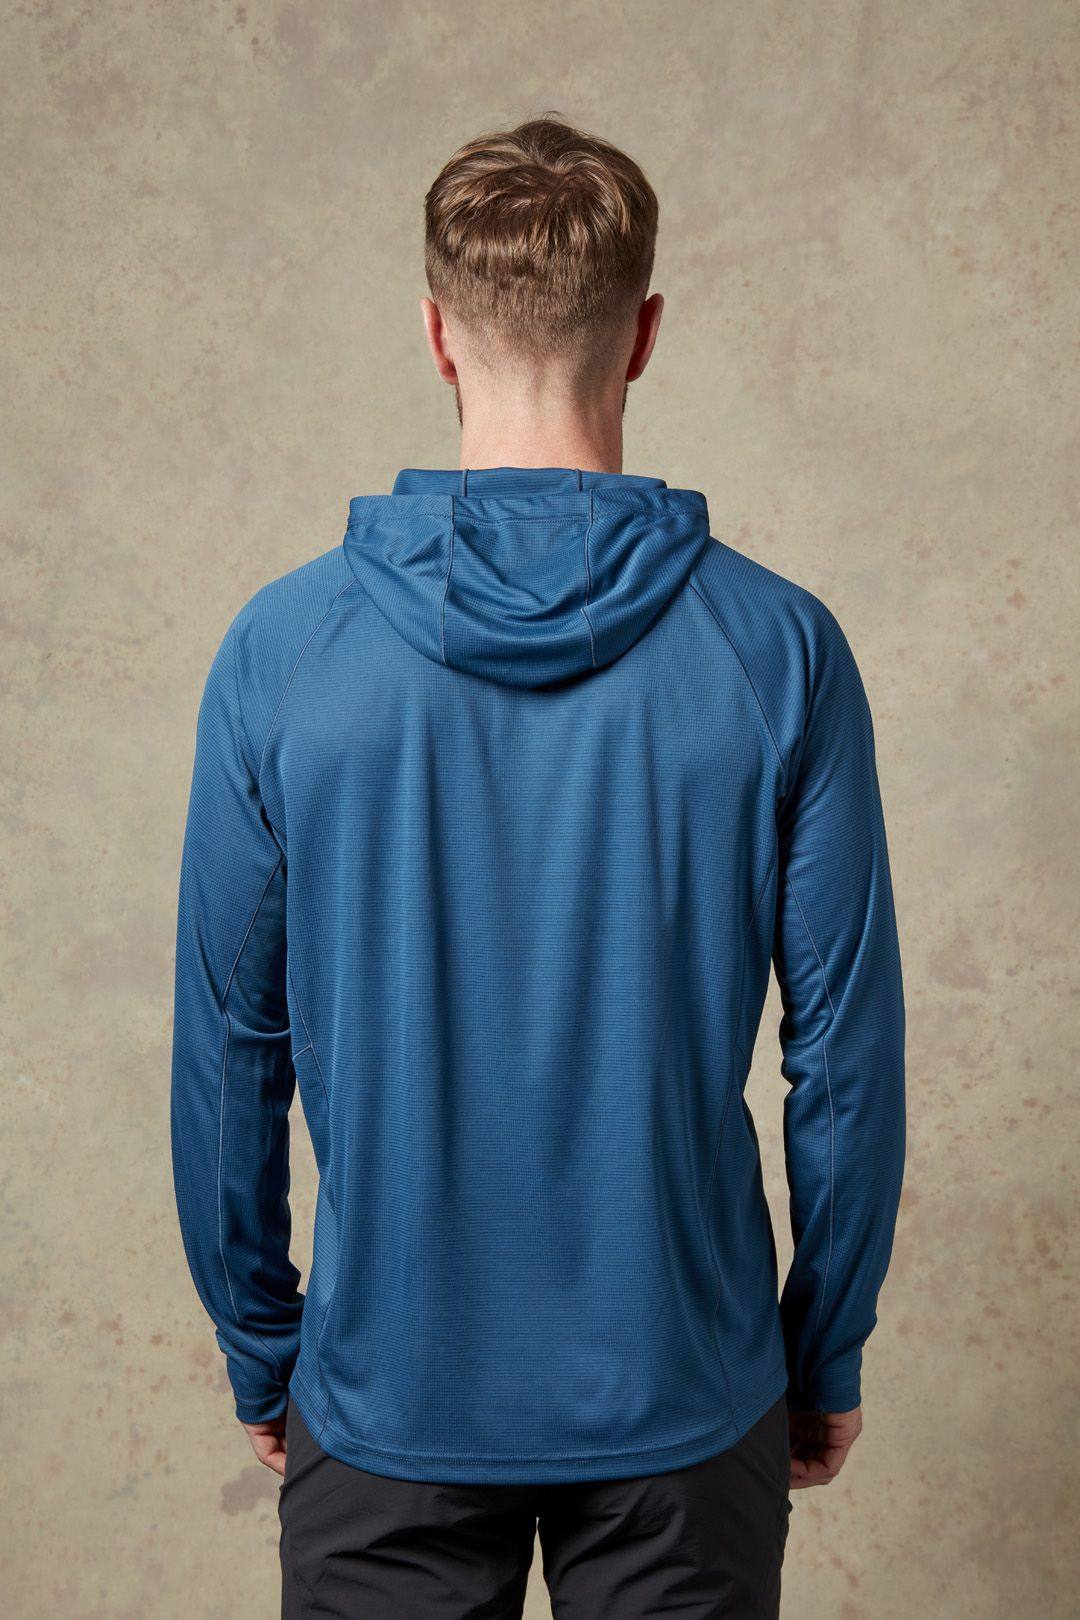 Coincidence Specialize Flawless Rab Pulse Hoody Factory Sale, GET 53% OFF, www.peopletray.com